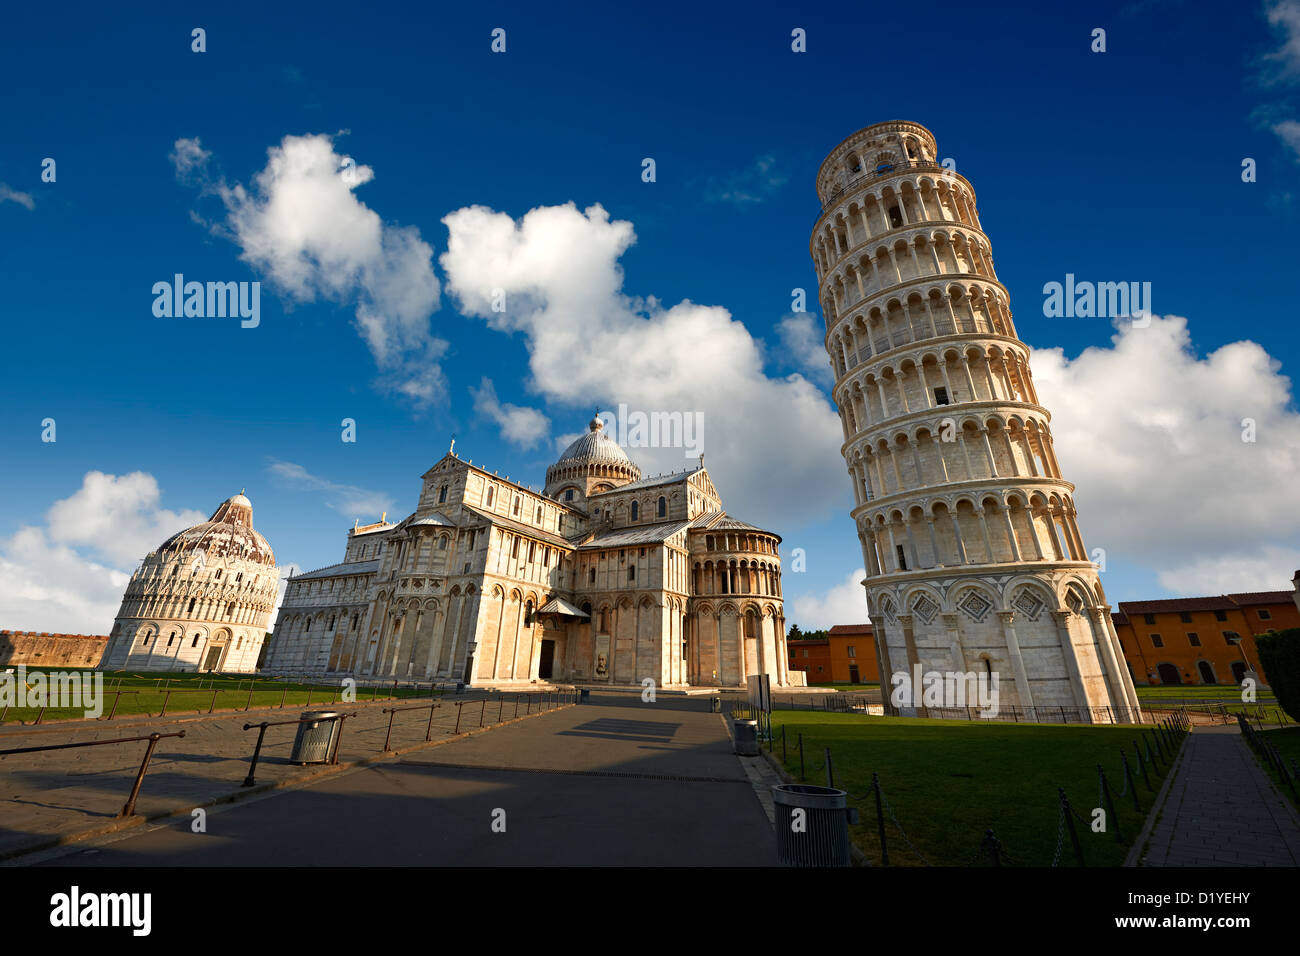 The Leaning Tower Of Pisa, Italy Stock Photo